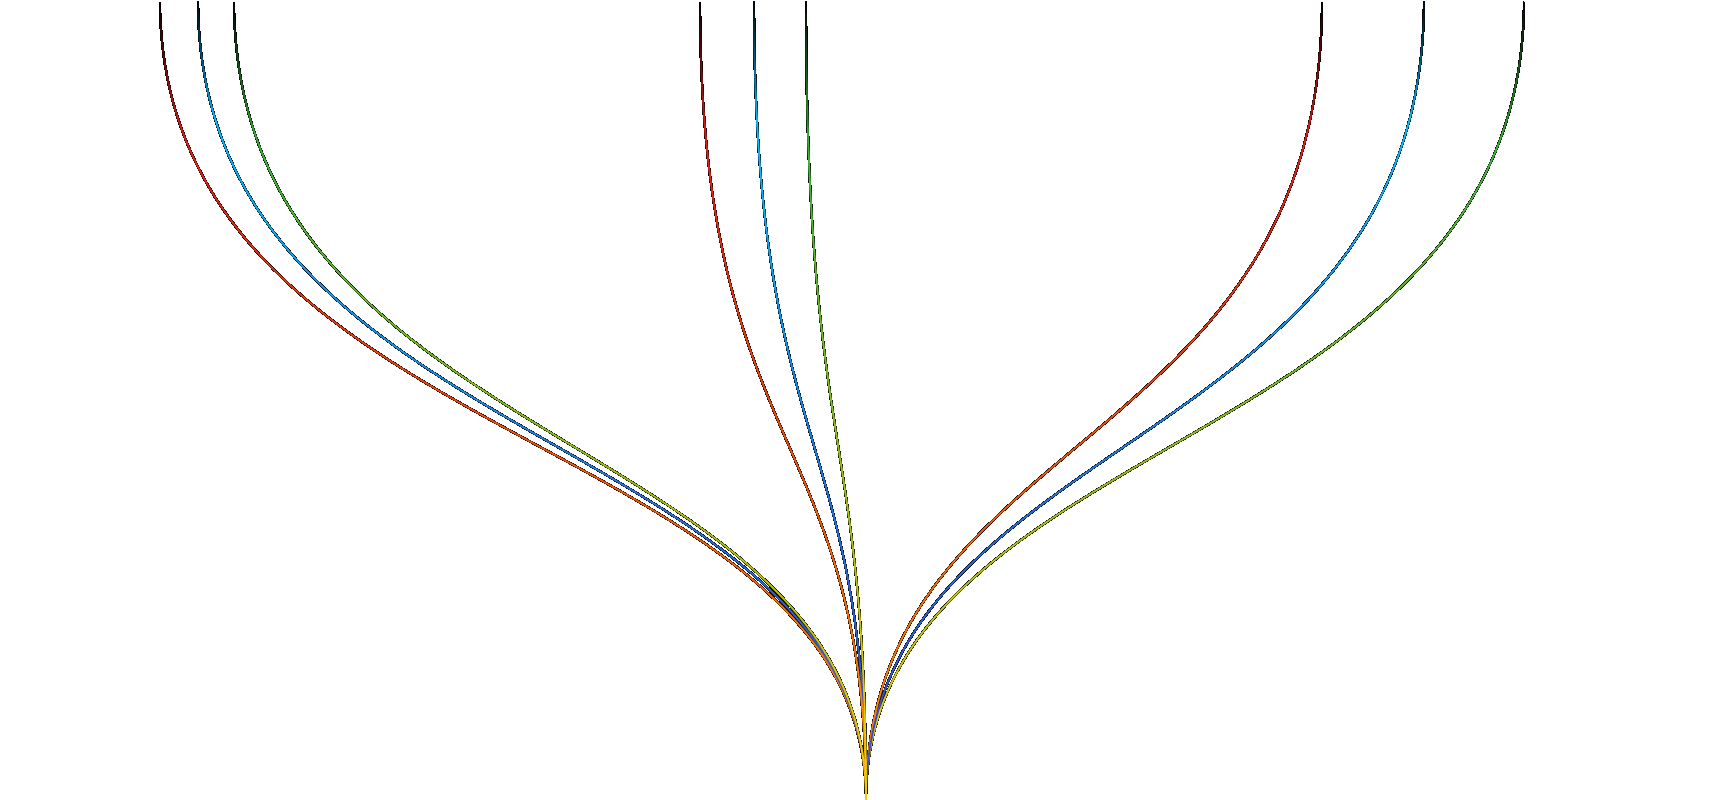 A large graphic of multi-colored lines converging in a single point.